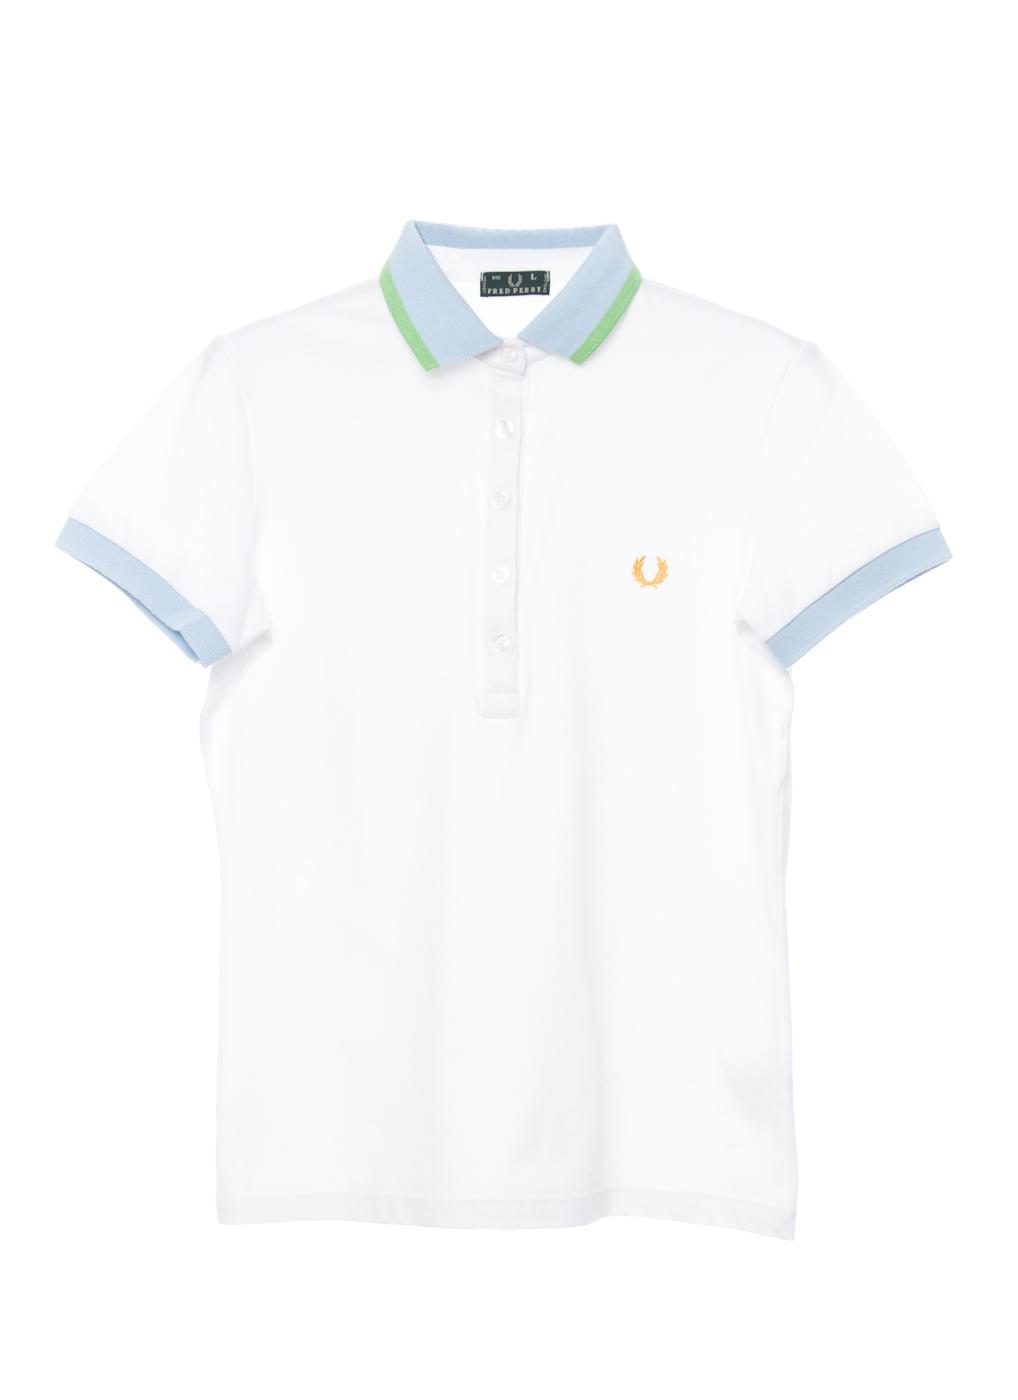 Foto Polo Fred Perry Stretch Gold foto 289454